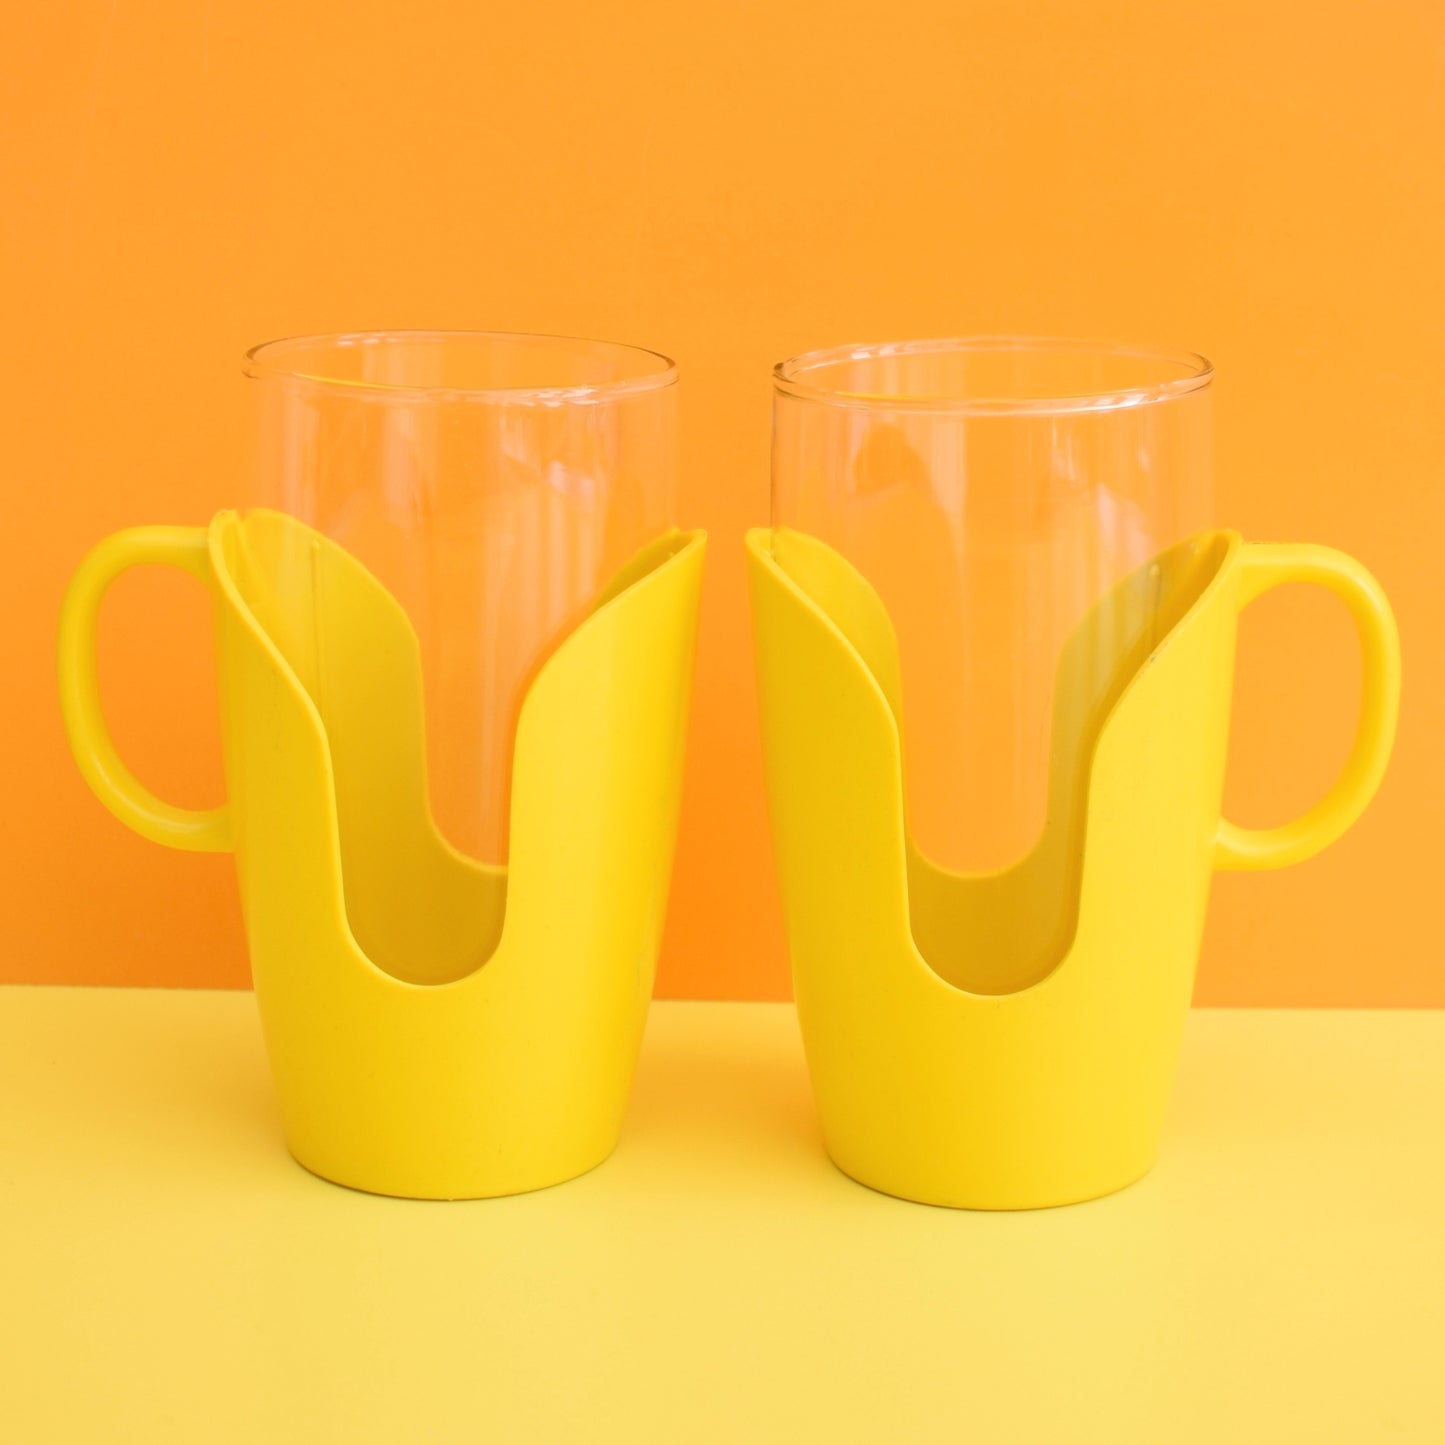 Vintage 1960s Drink-Up Glass Mugs x2 - Yellow